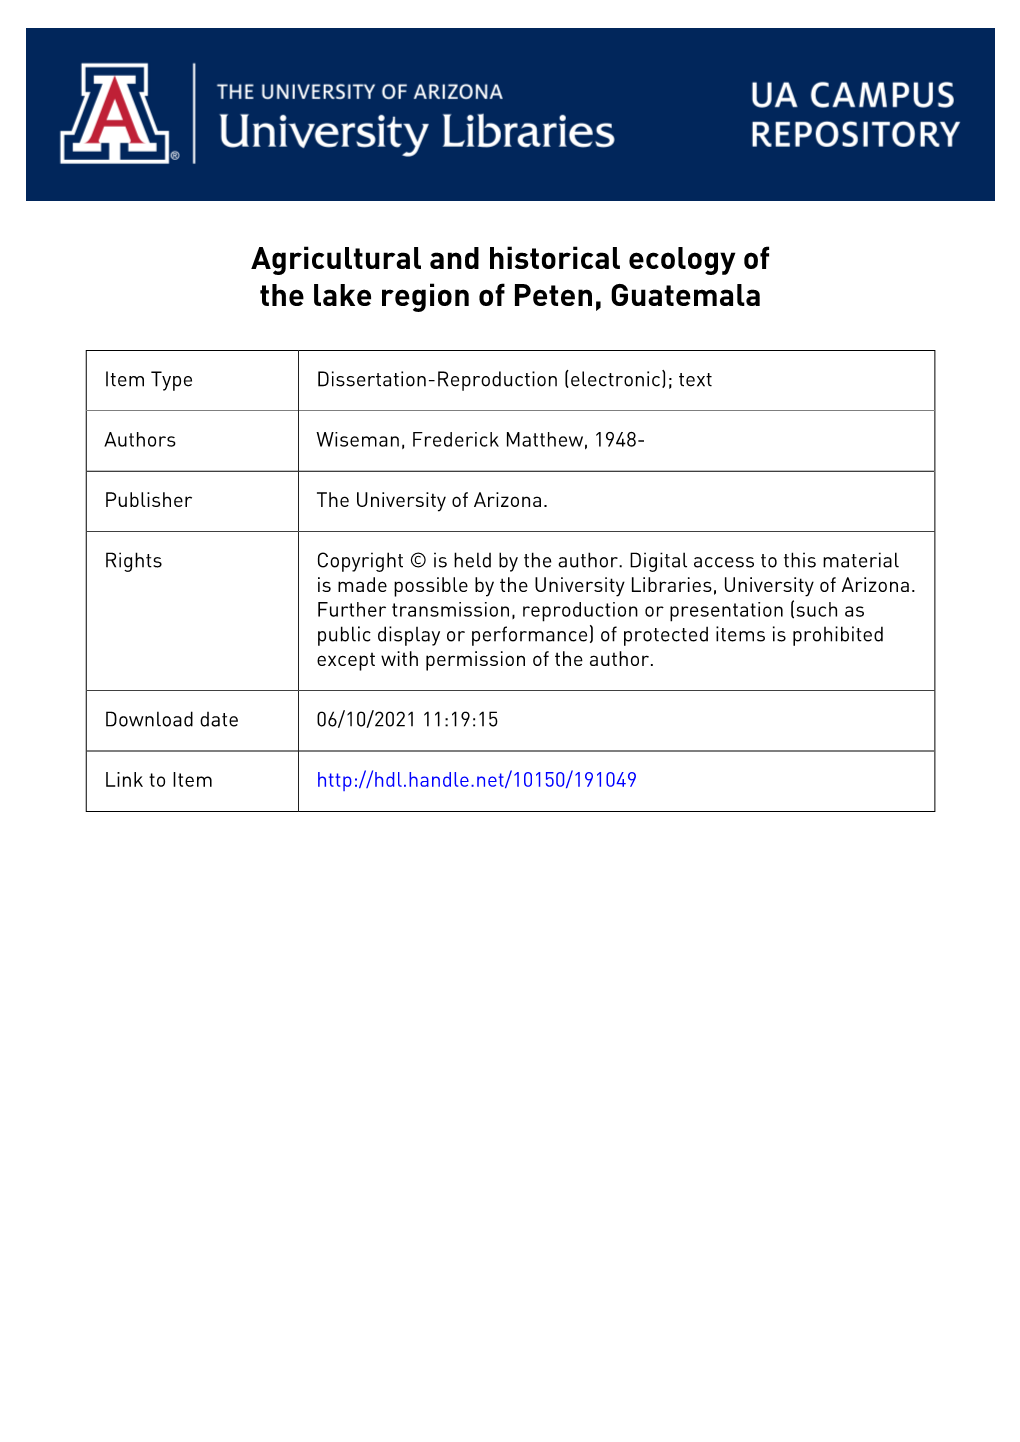 Agricultural and Historical Ecology of the Lake Region of Peten, Guatemala